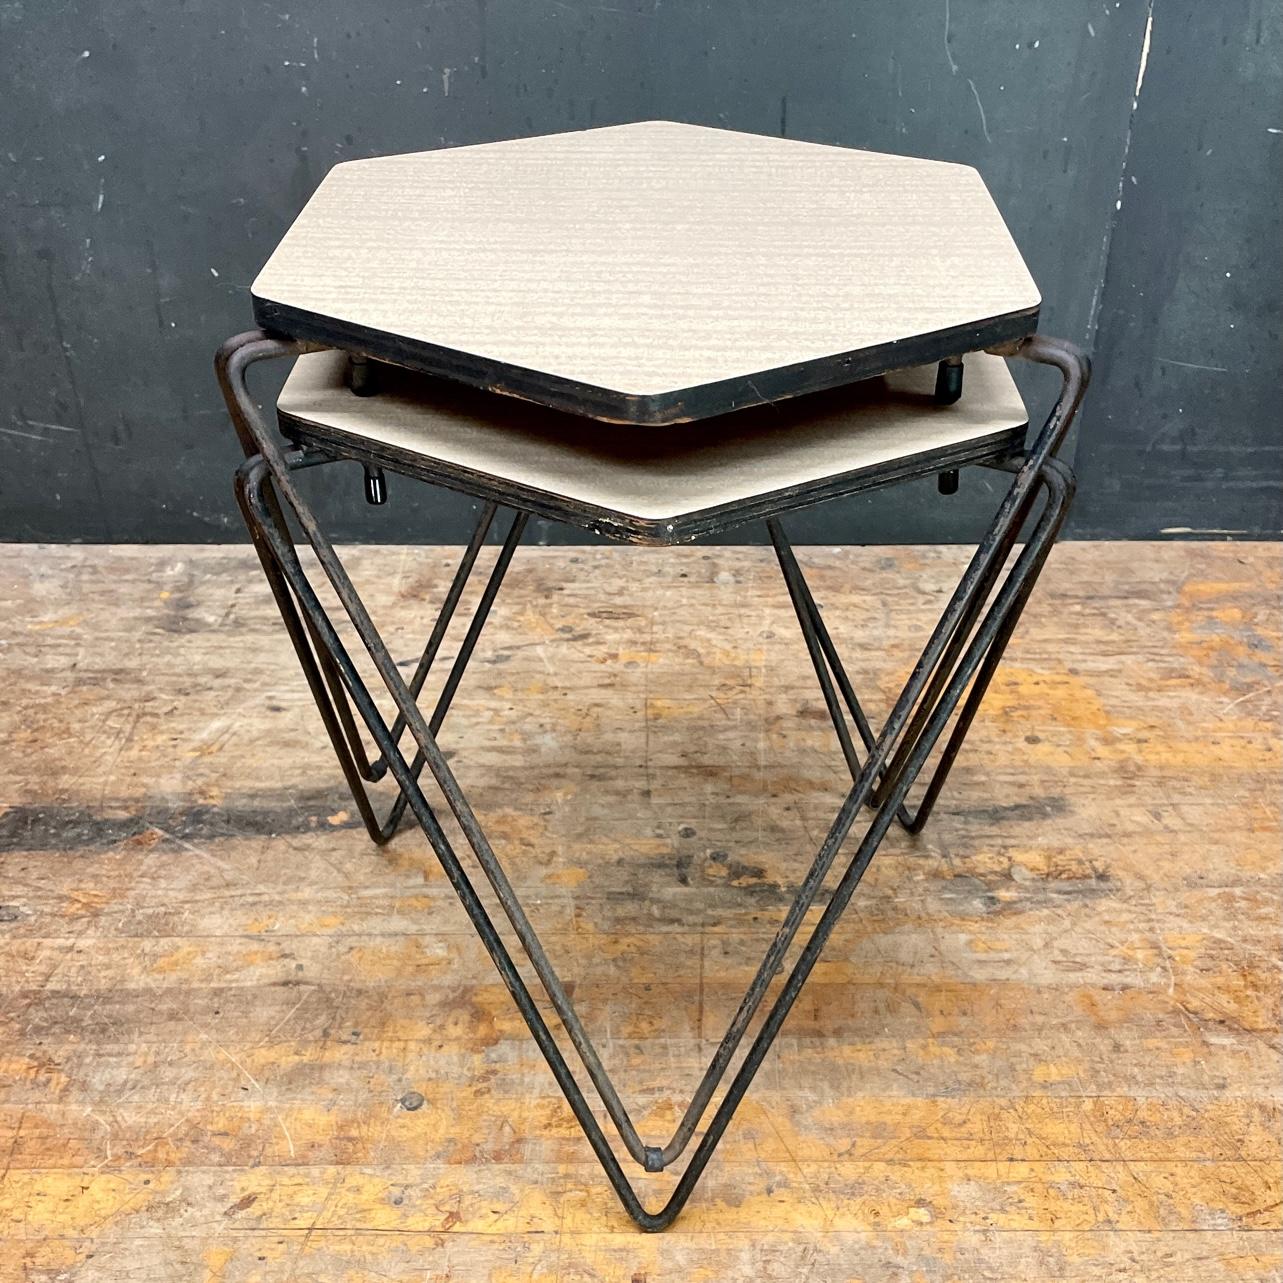 1950s Architects Prismatic Stacking Tables Pair Mid-Century Geometric Pedestal In Fair Condition For Sale In Hyattsville, MD